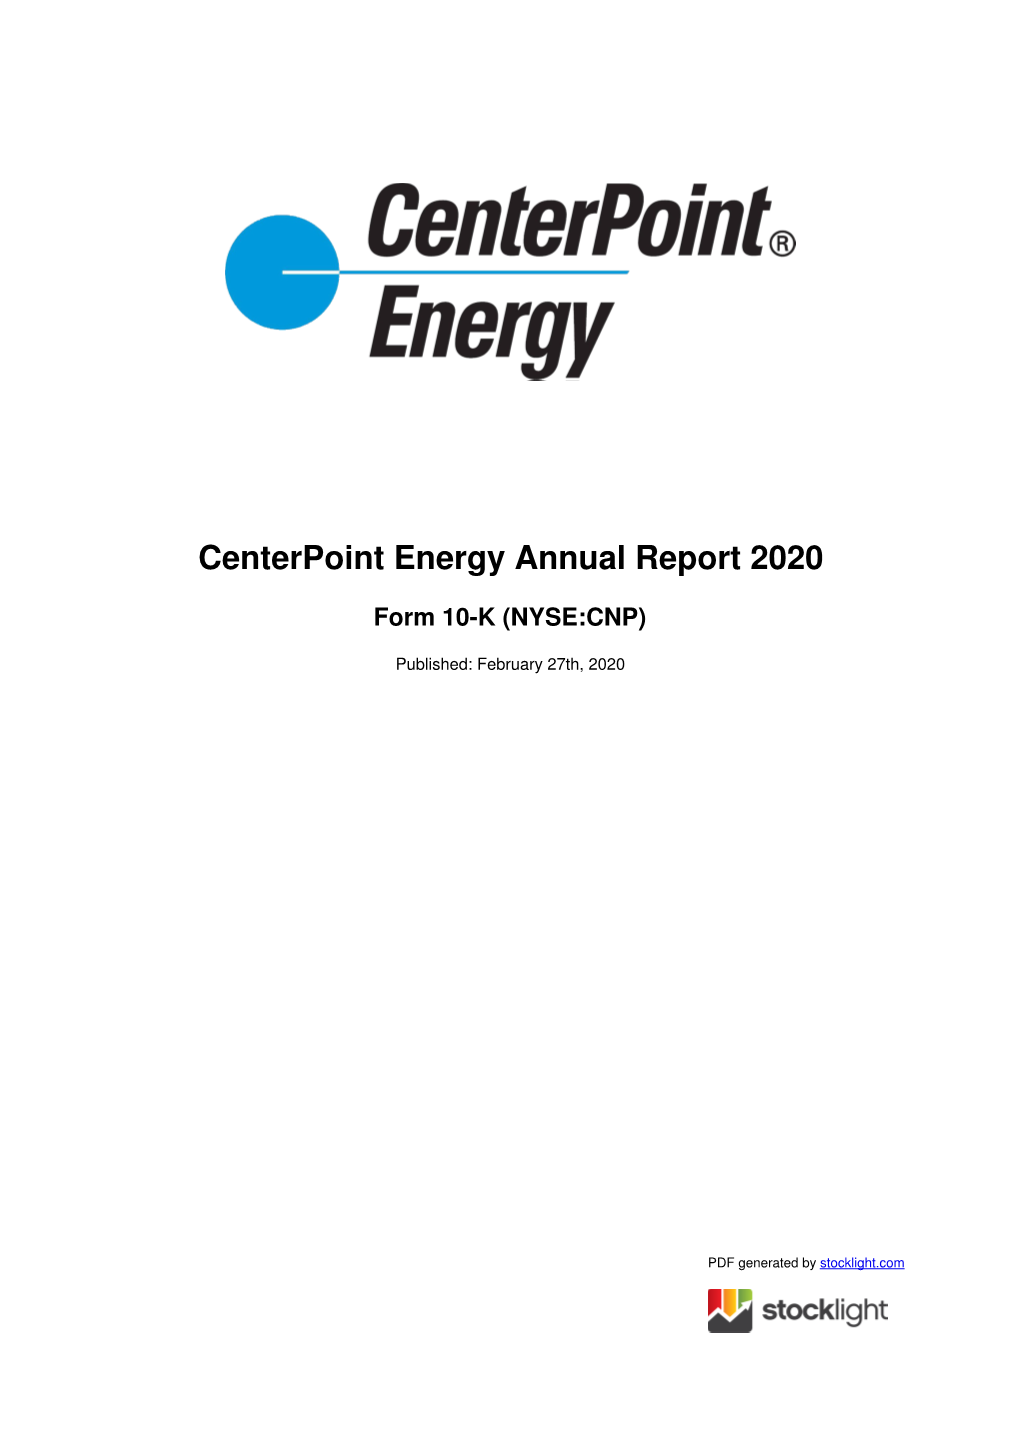 Centerpoint Energy Annual Report 2020